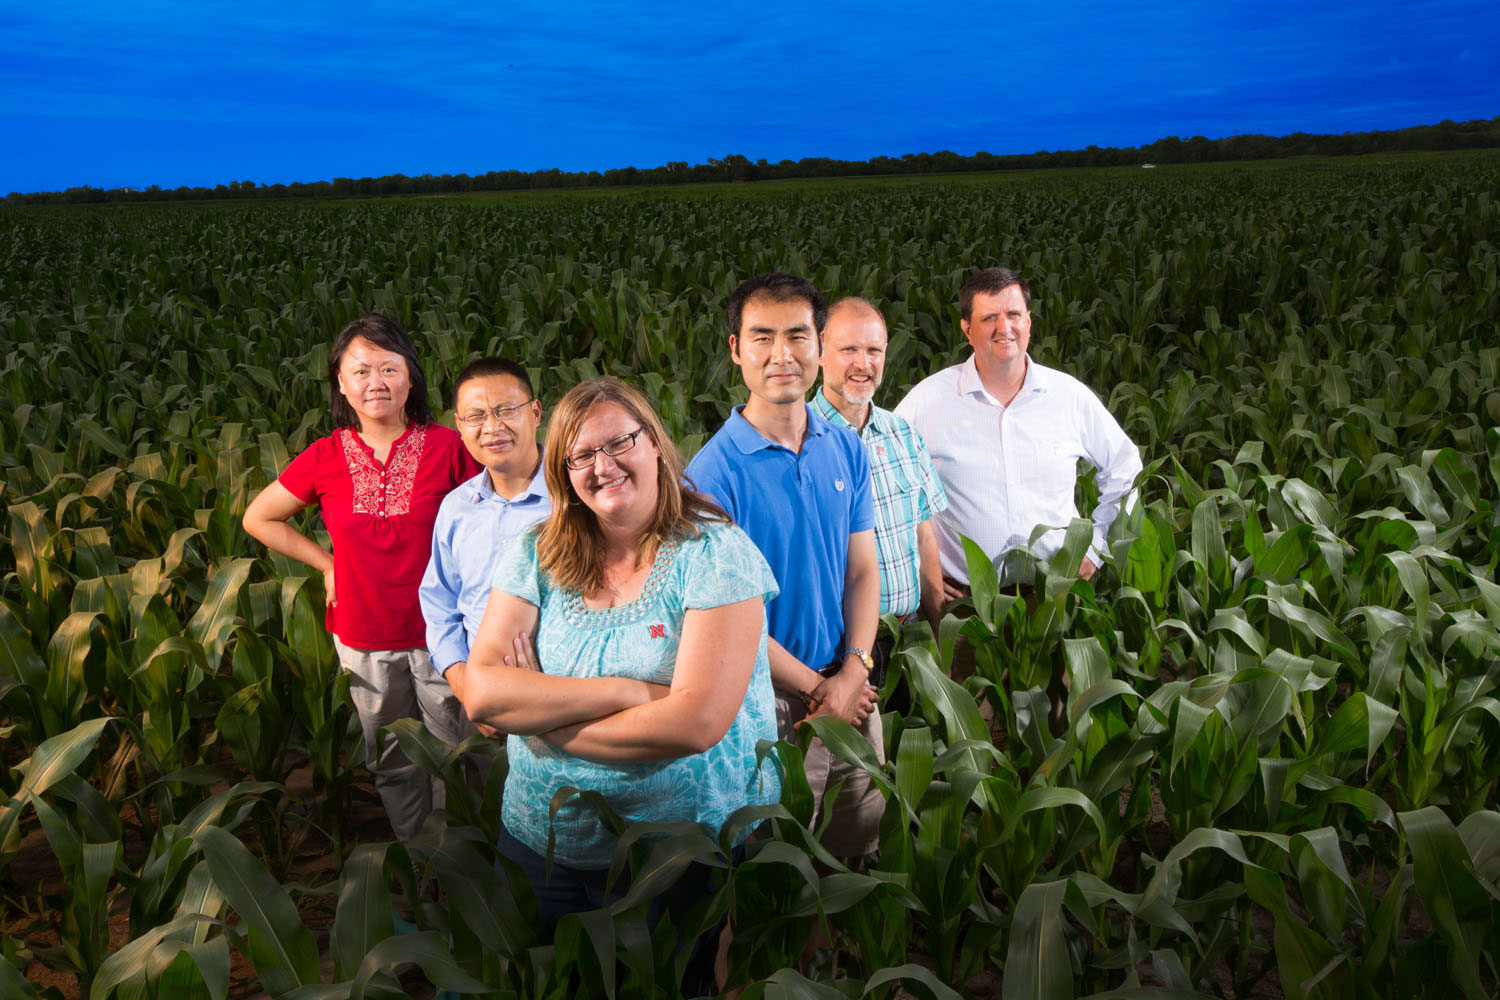 UNL climate change and groundwater quality team, from left: Yusong Li, civil engineering; Zhenghong Tang, community and regional planning; Shannon Bartelt-Hunt and Xu Li, civil engineering; Dan Snow, Nebraska Water Center; and Eric Thompson, economics. Not pictured, David Rosenbaum, economics.